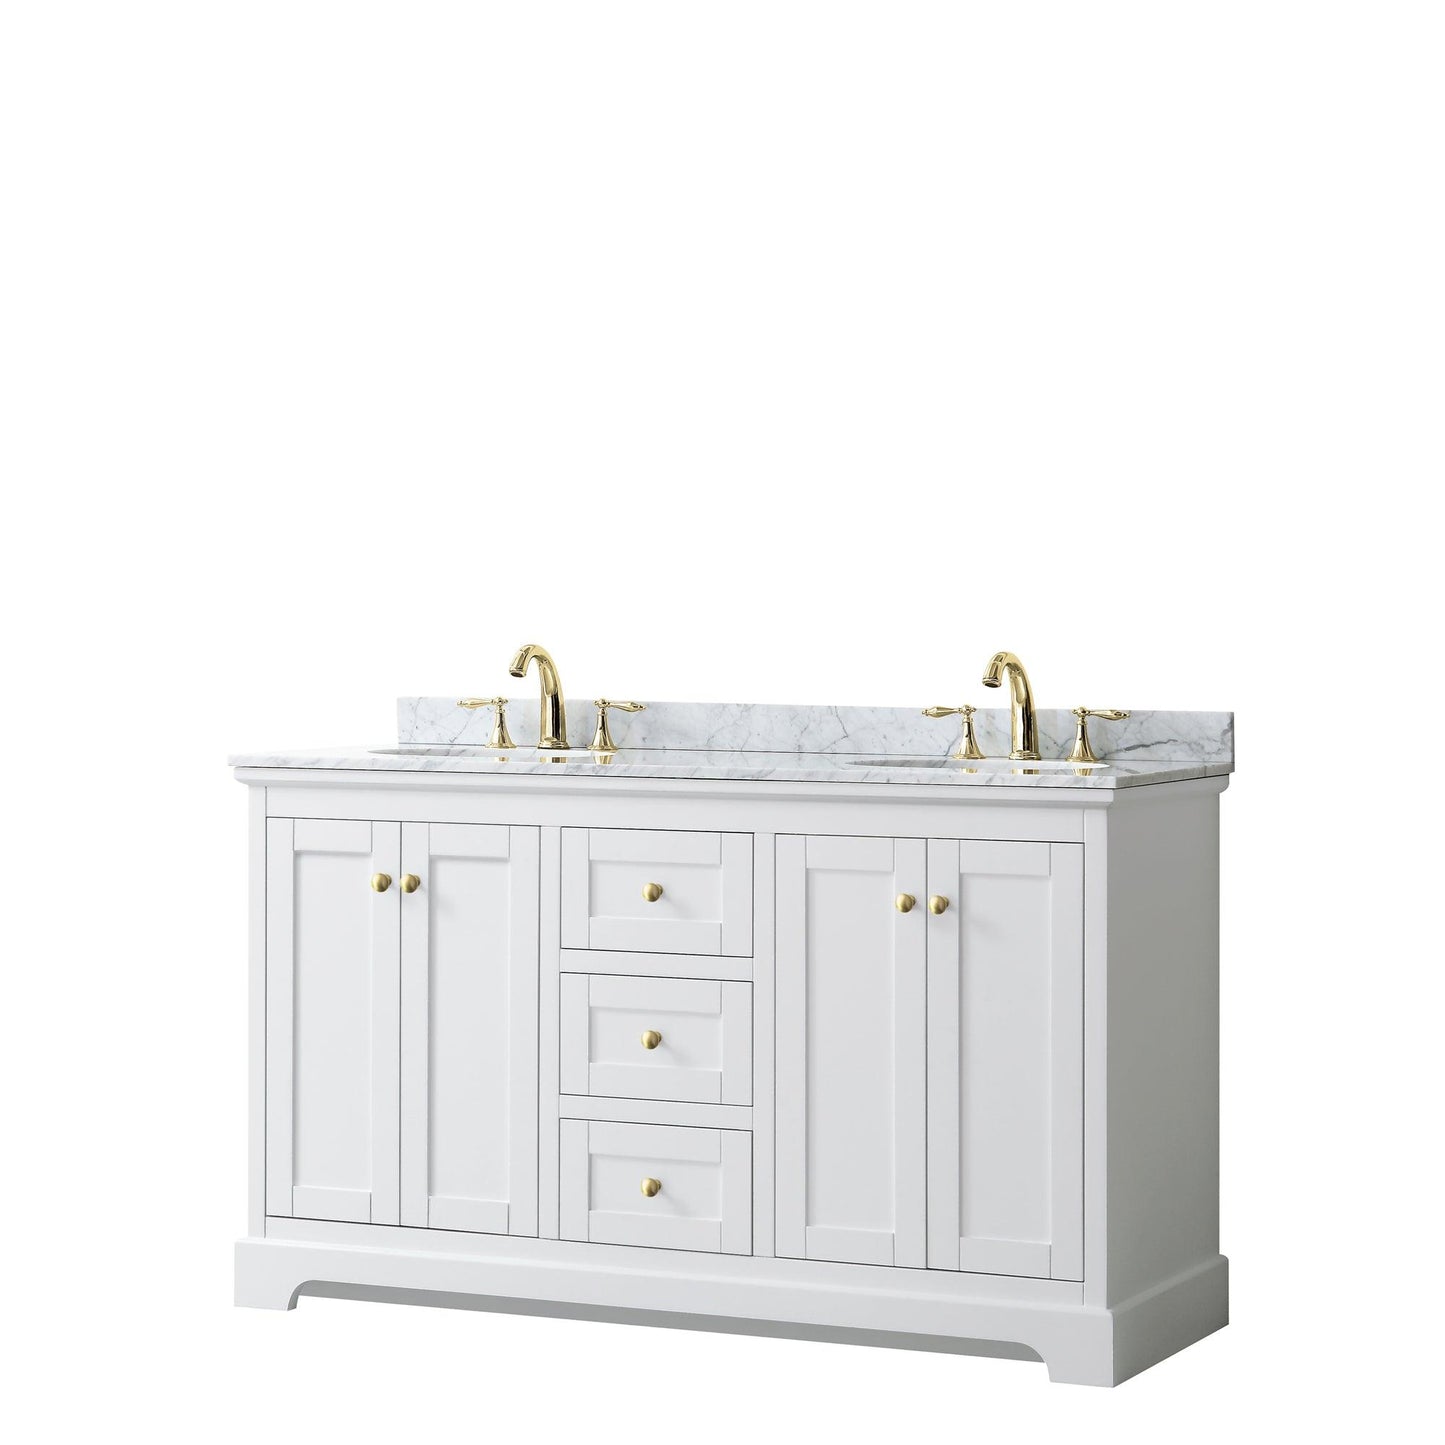 Wyndham Collection Avery Double Bathroom Vanity in White, White Carrara Marble Countertop, Undermount Oval Sinks, Optional Mirror, Brushed Gold Trim - Sea & Stone Bath